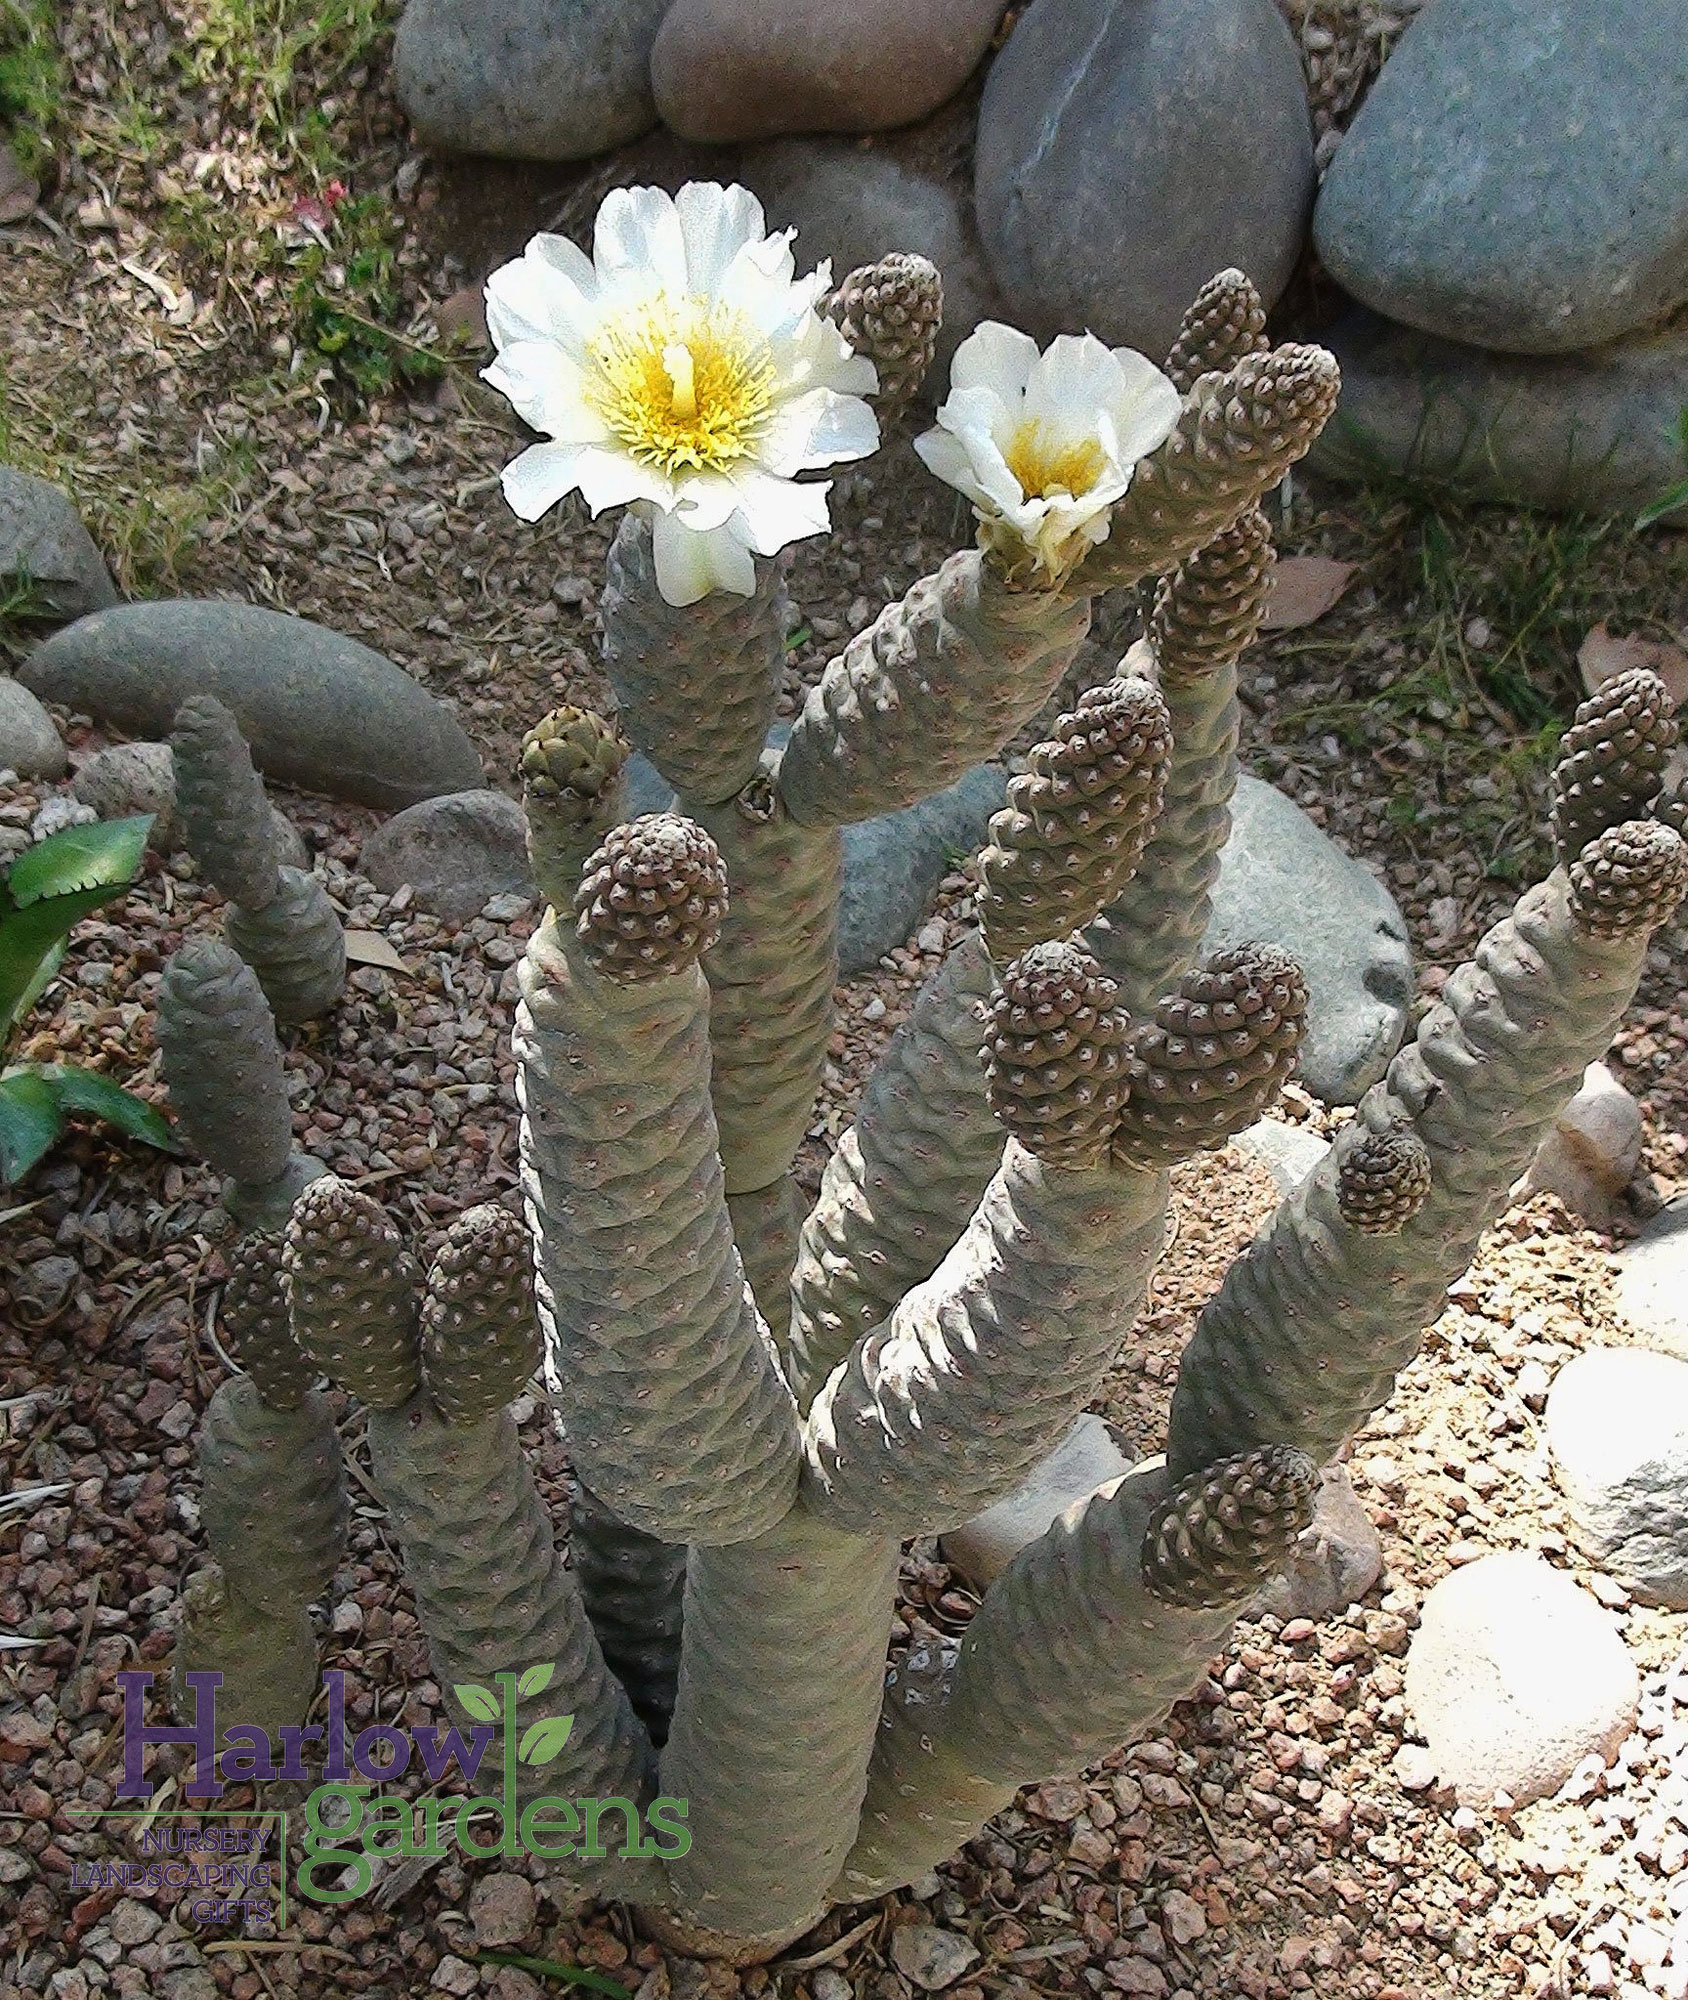 Pine Cone Cactus for sale at Harlow Gardens Tucson.